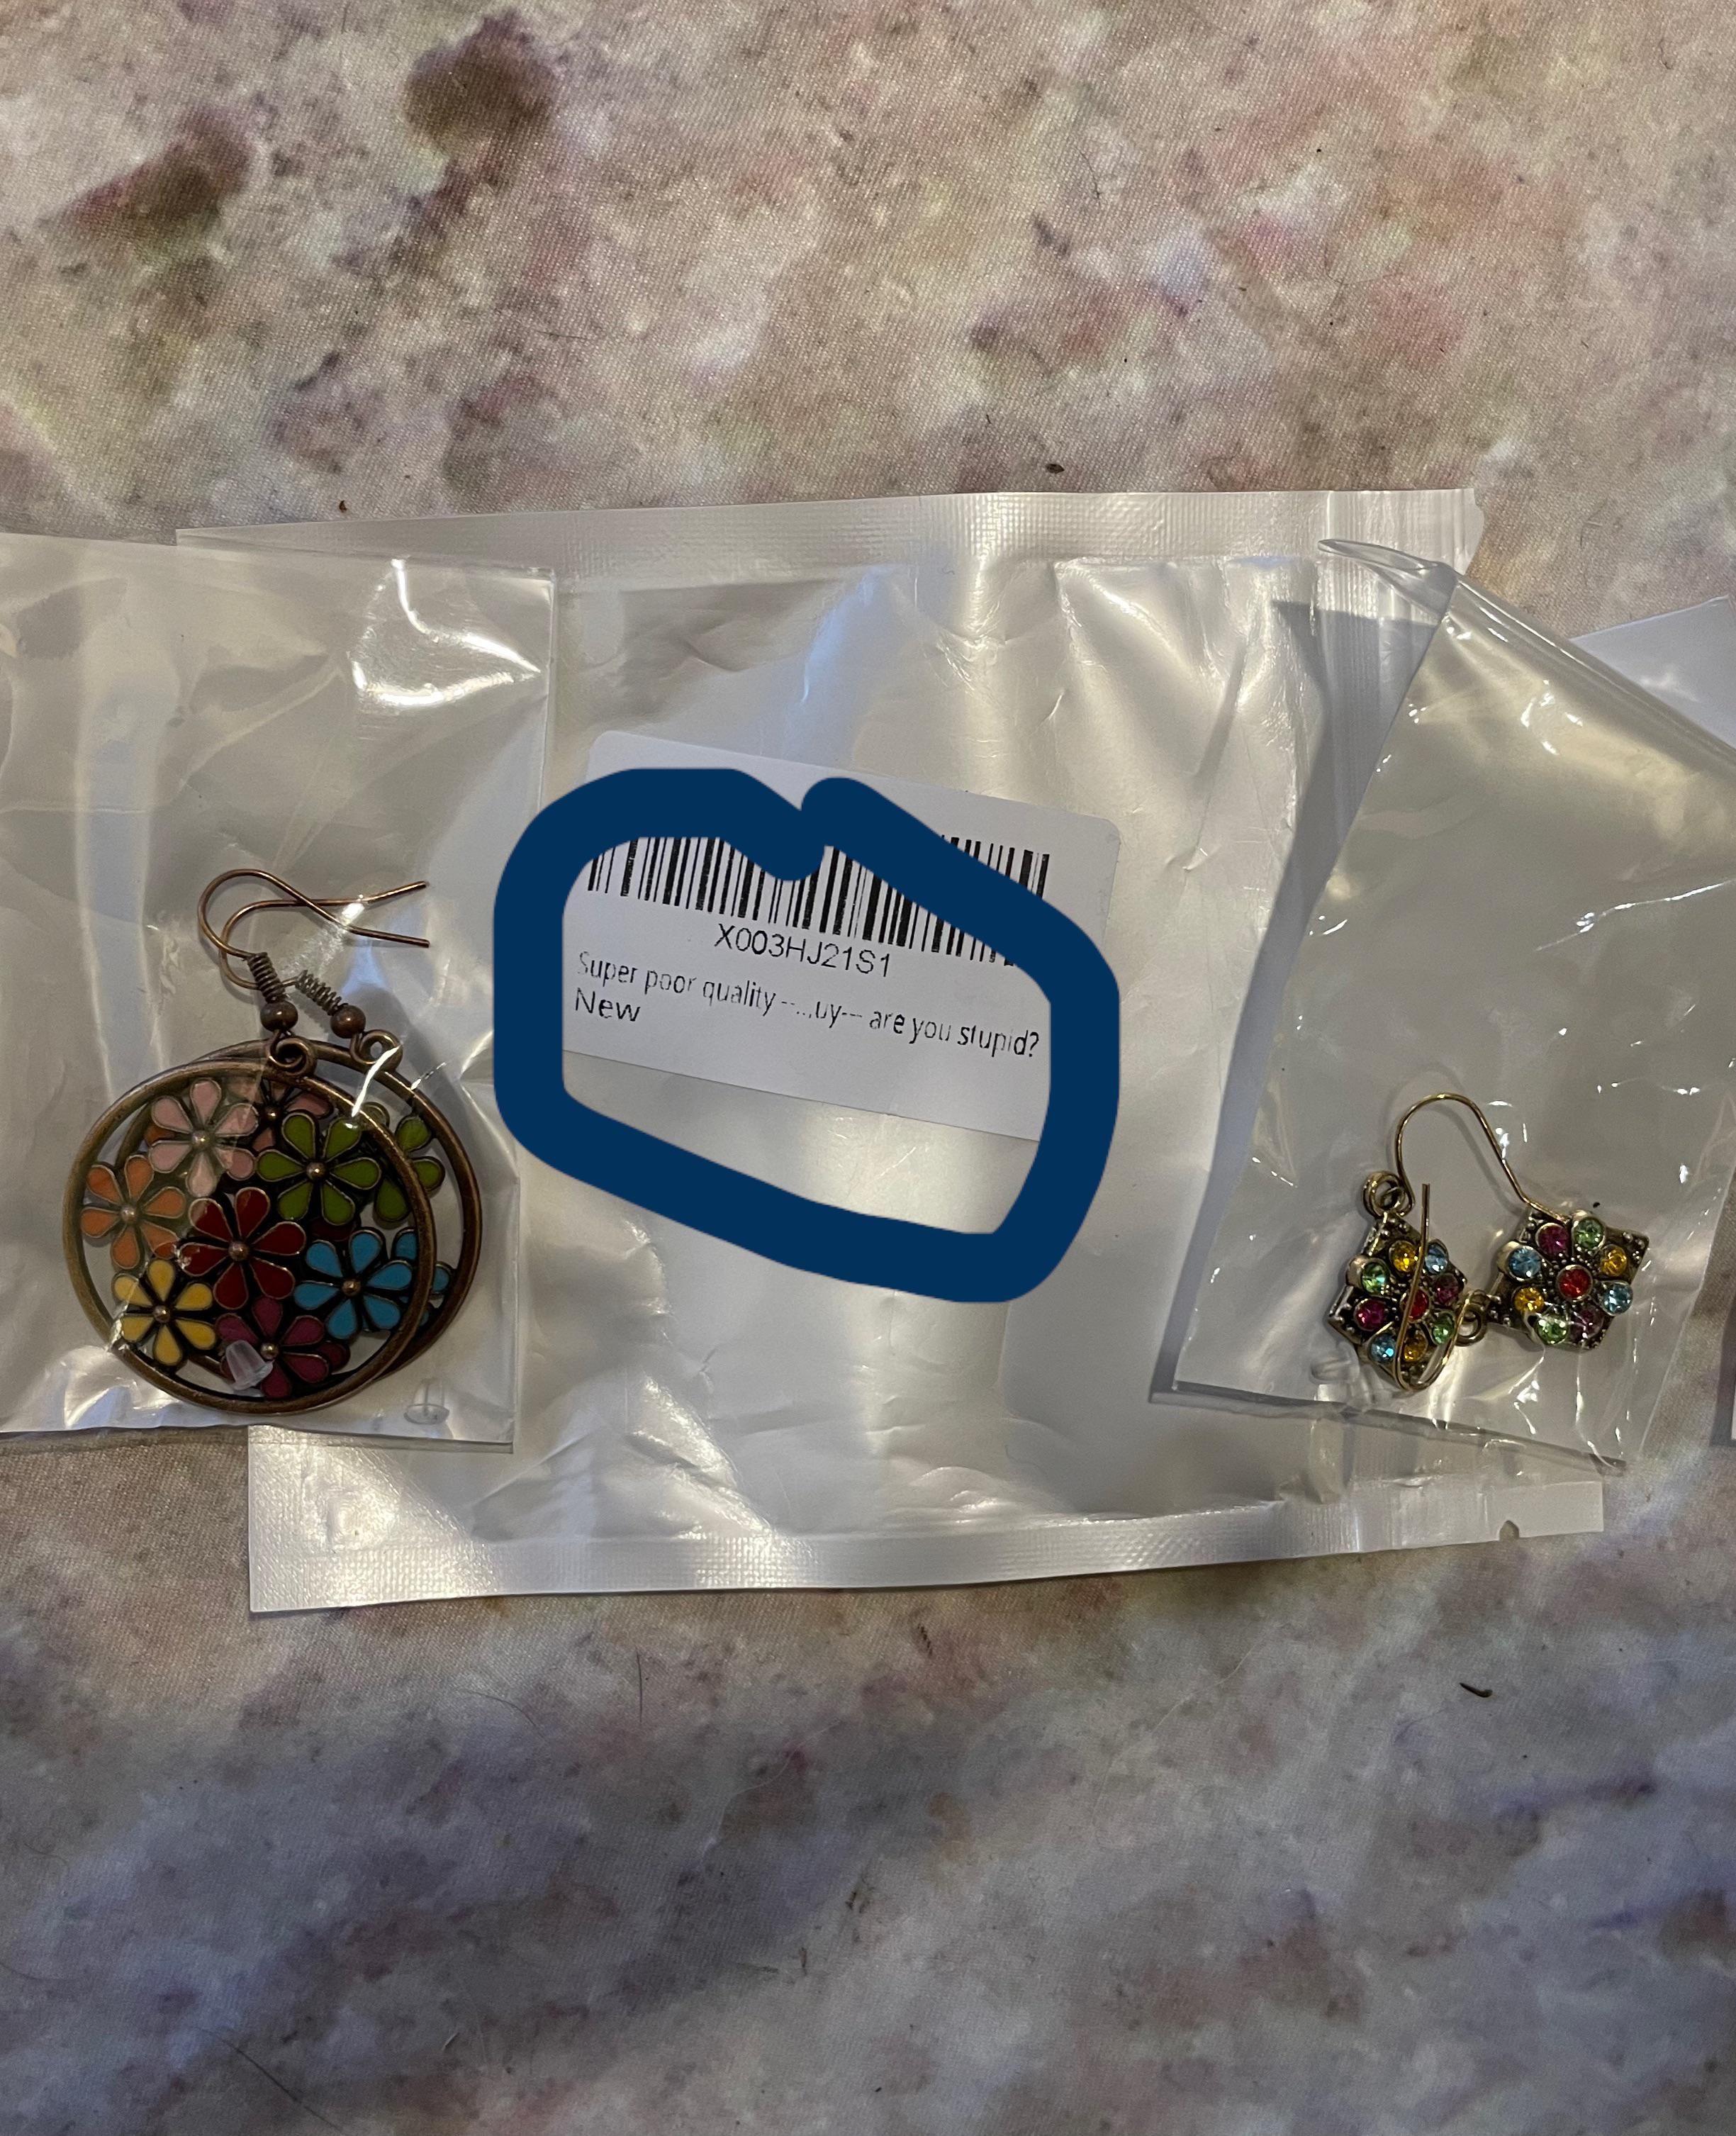 These earrings bought on Amazon are labeled “Super poor quality…by, are you stupid?”